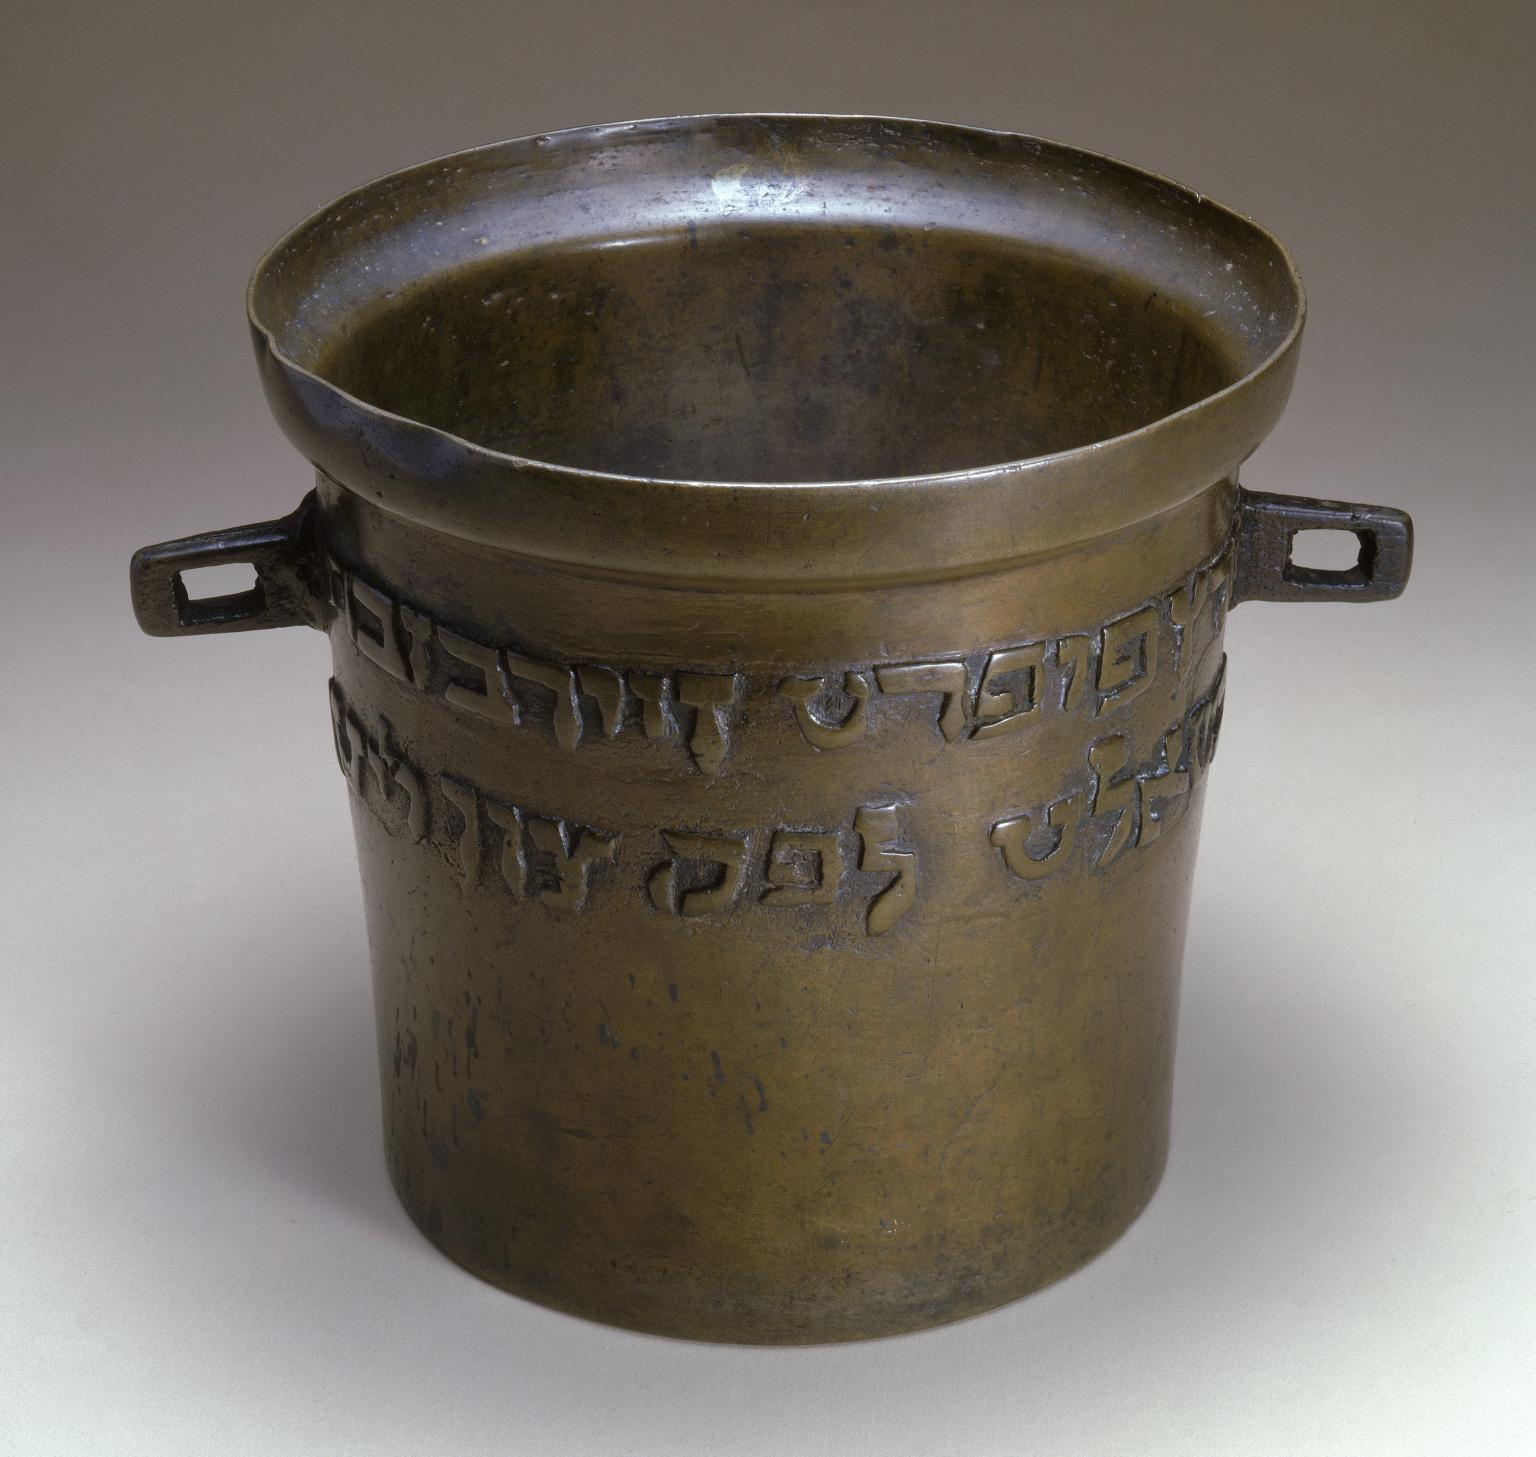 Pot with Hebrew inscription and two handles. 